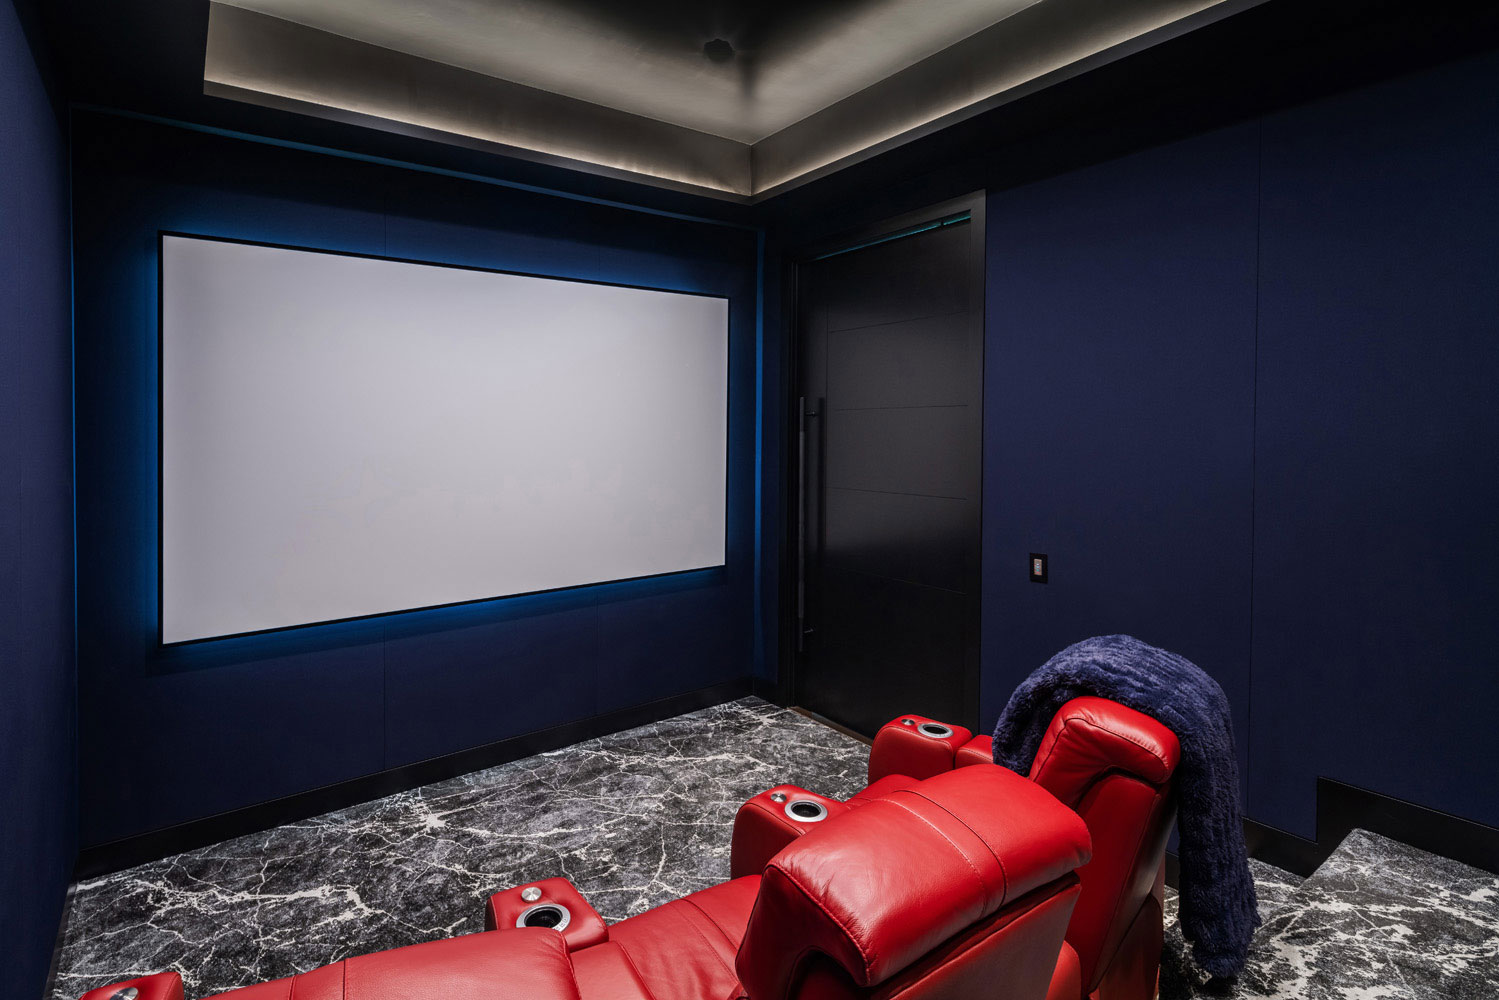 The media room features LED lighting, acoustical materials and concealed speakers.